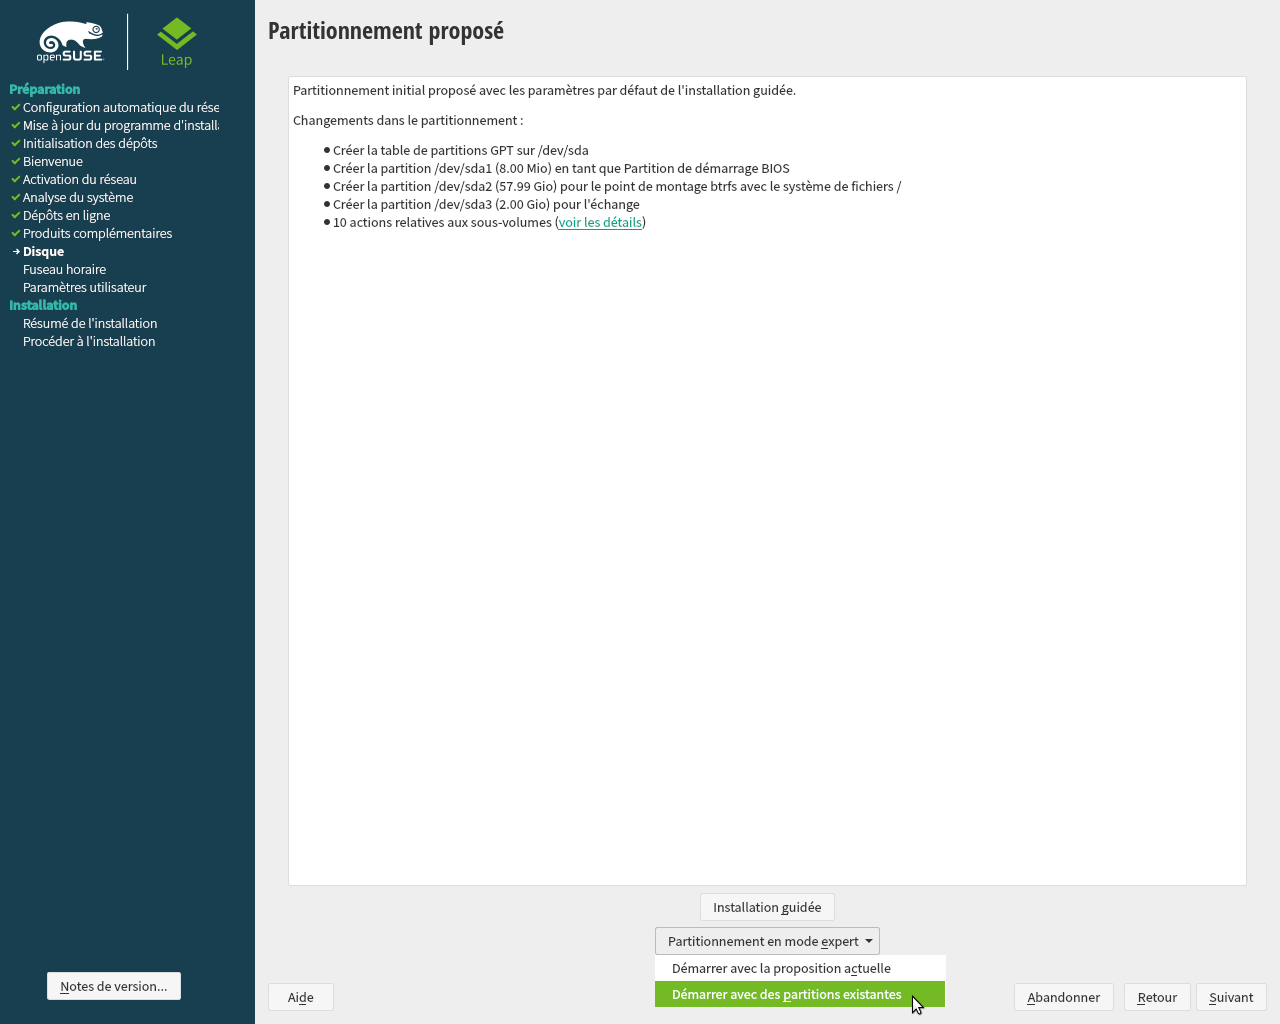 OpenSUSE Leap 15.2 Installation